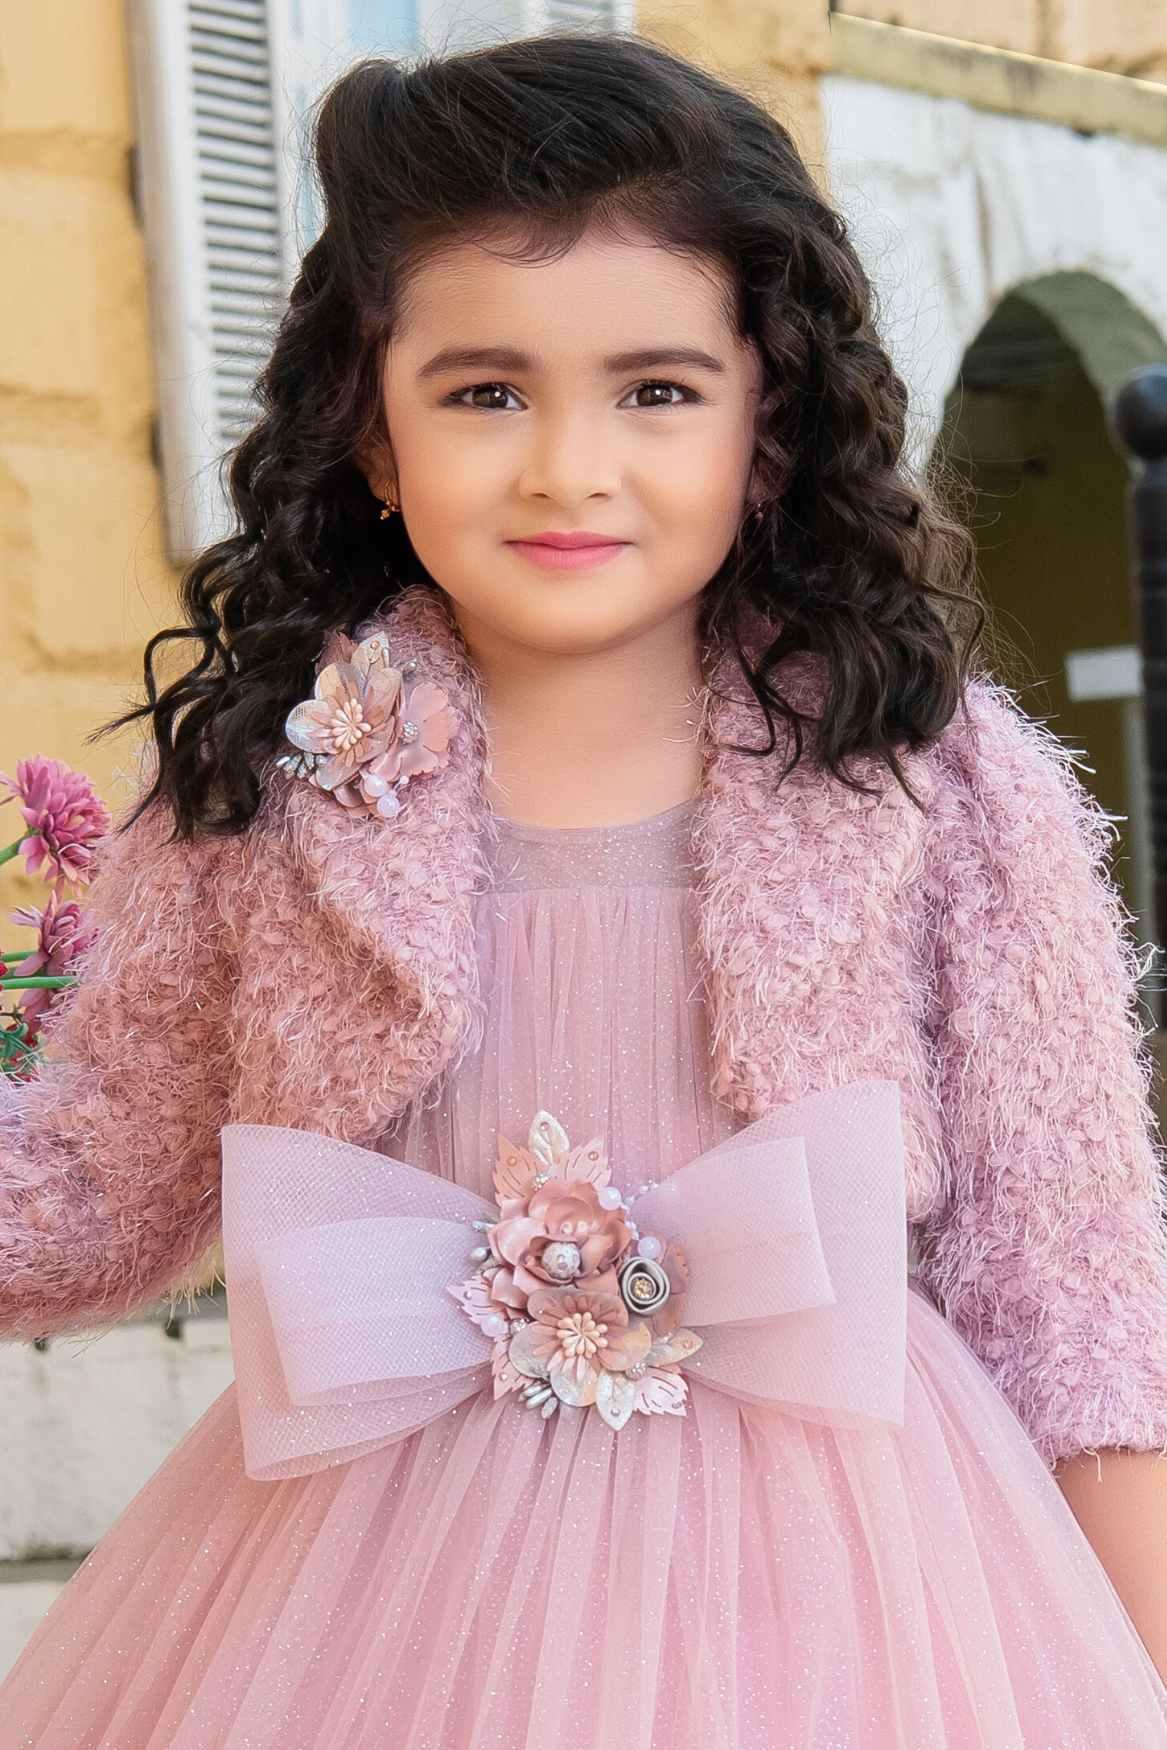 Onion Pink Ruffle Gown With Bow Embellishment And Overcoat For Girls - Lagorii Kids